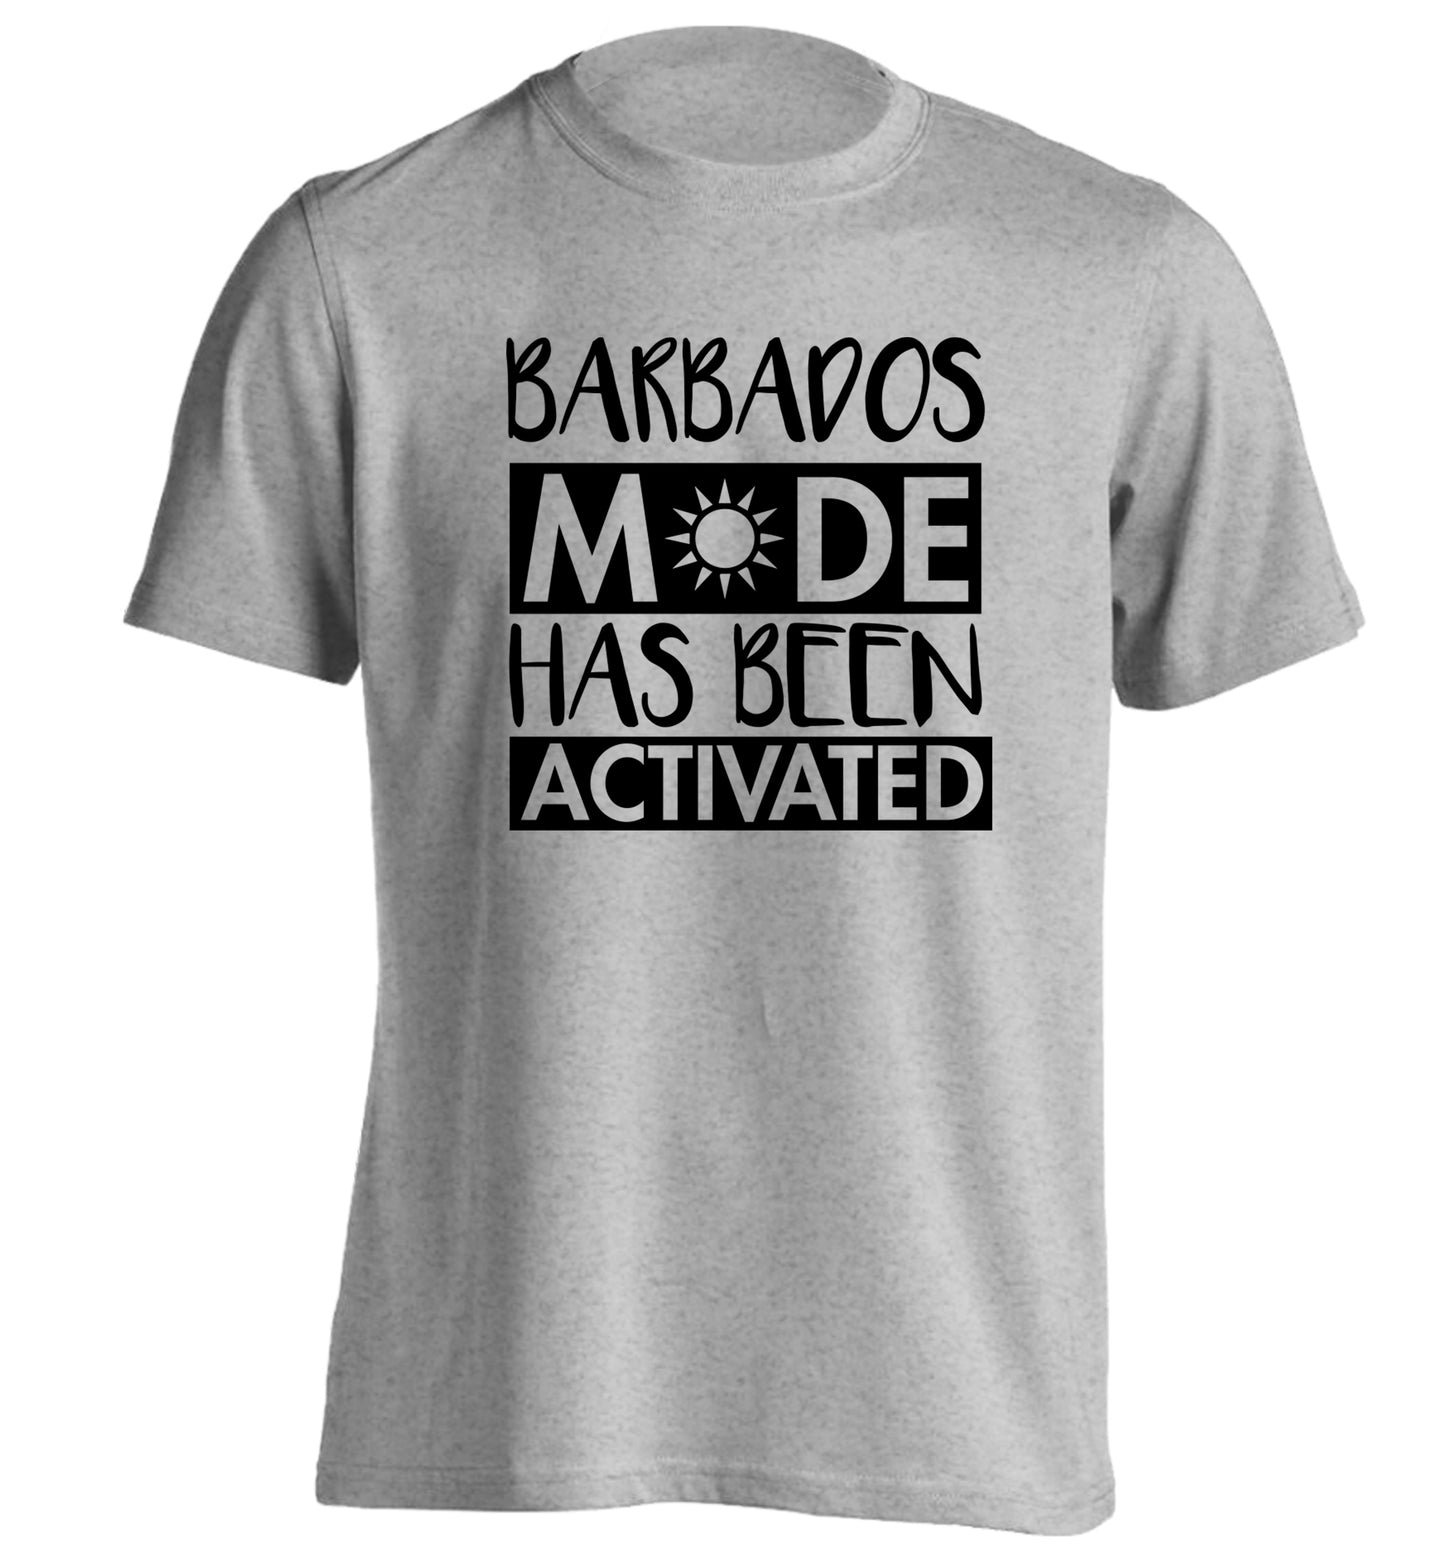 Barbados mode has been activated adults unisex grey Tshirt 2XL